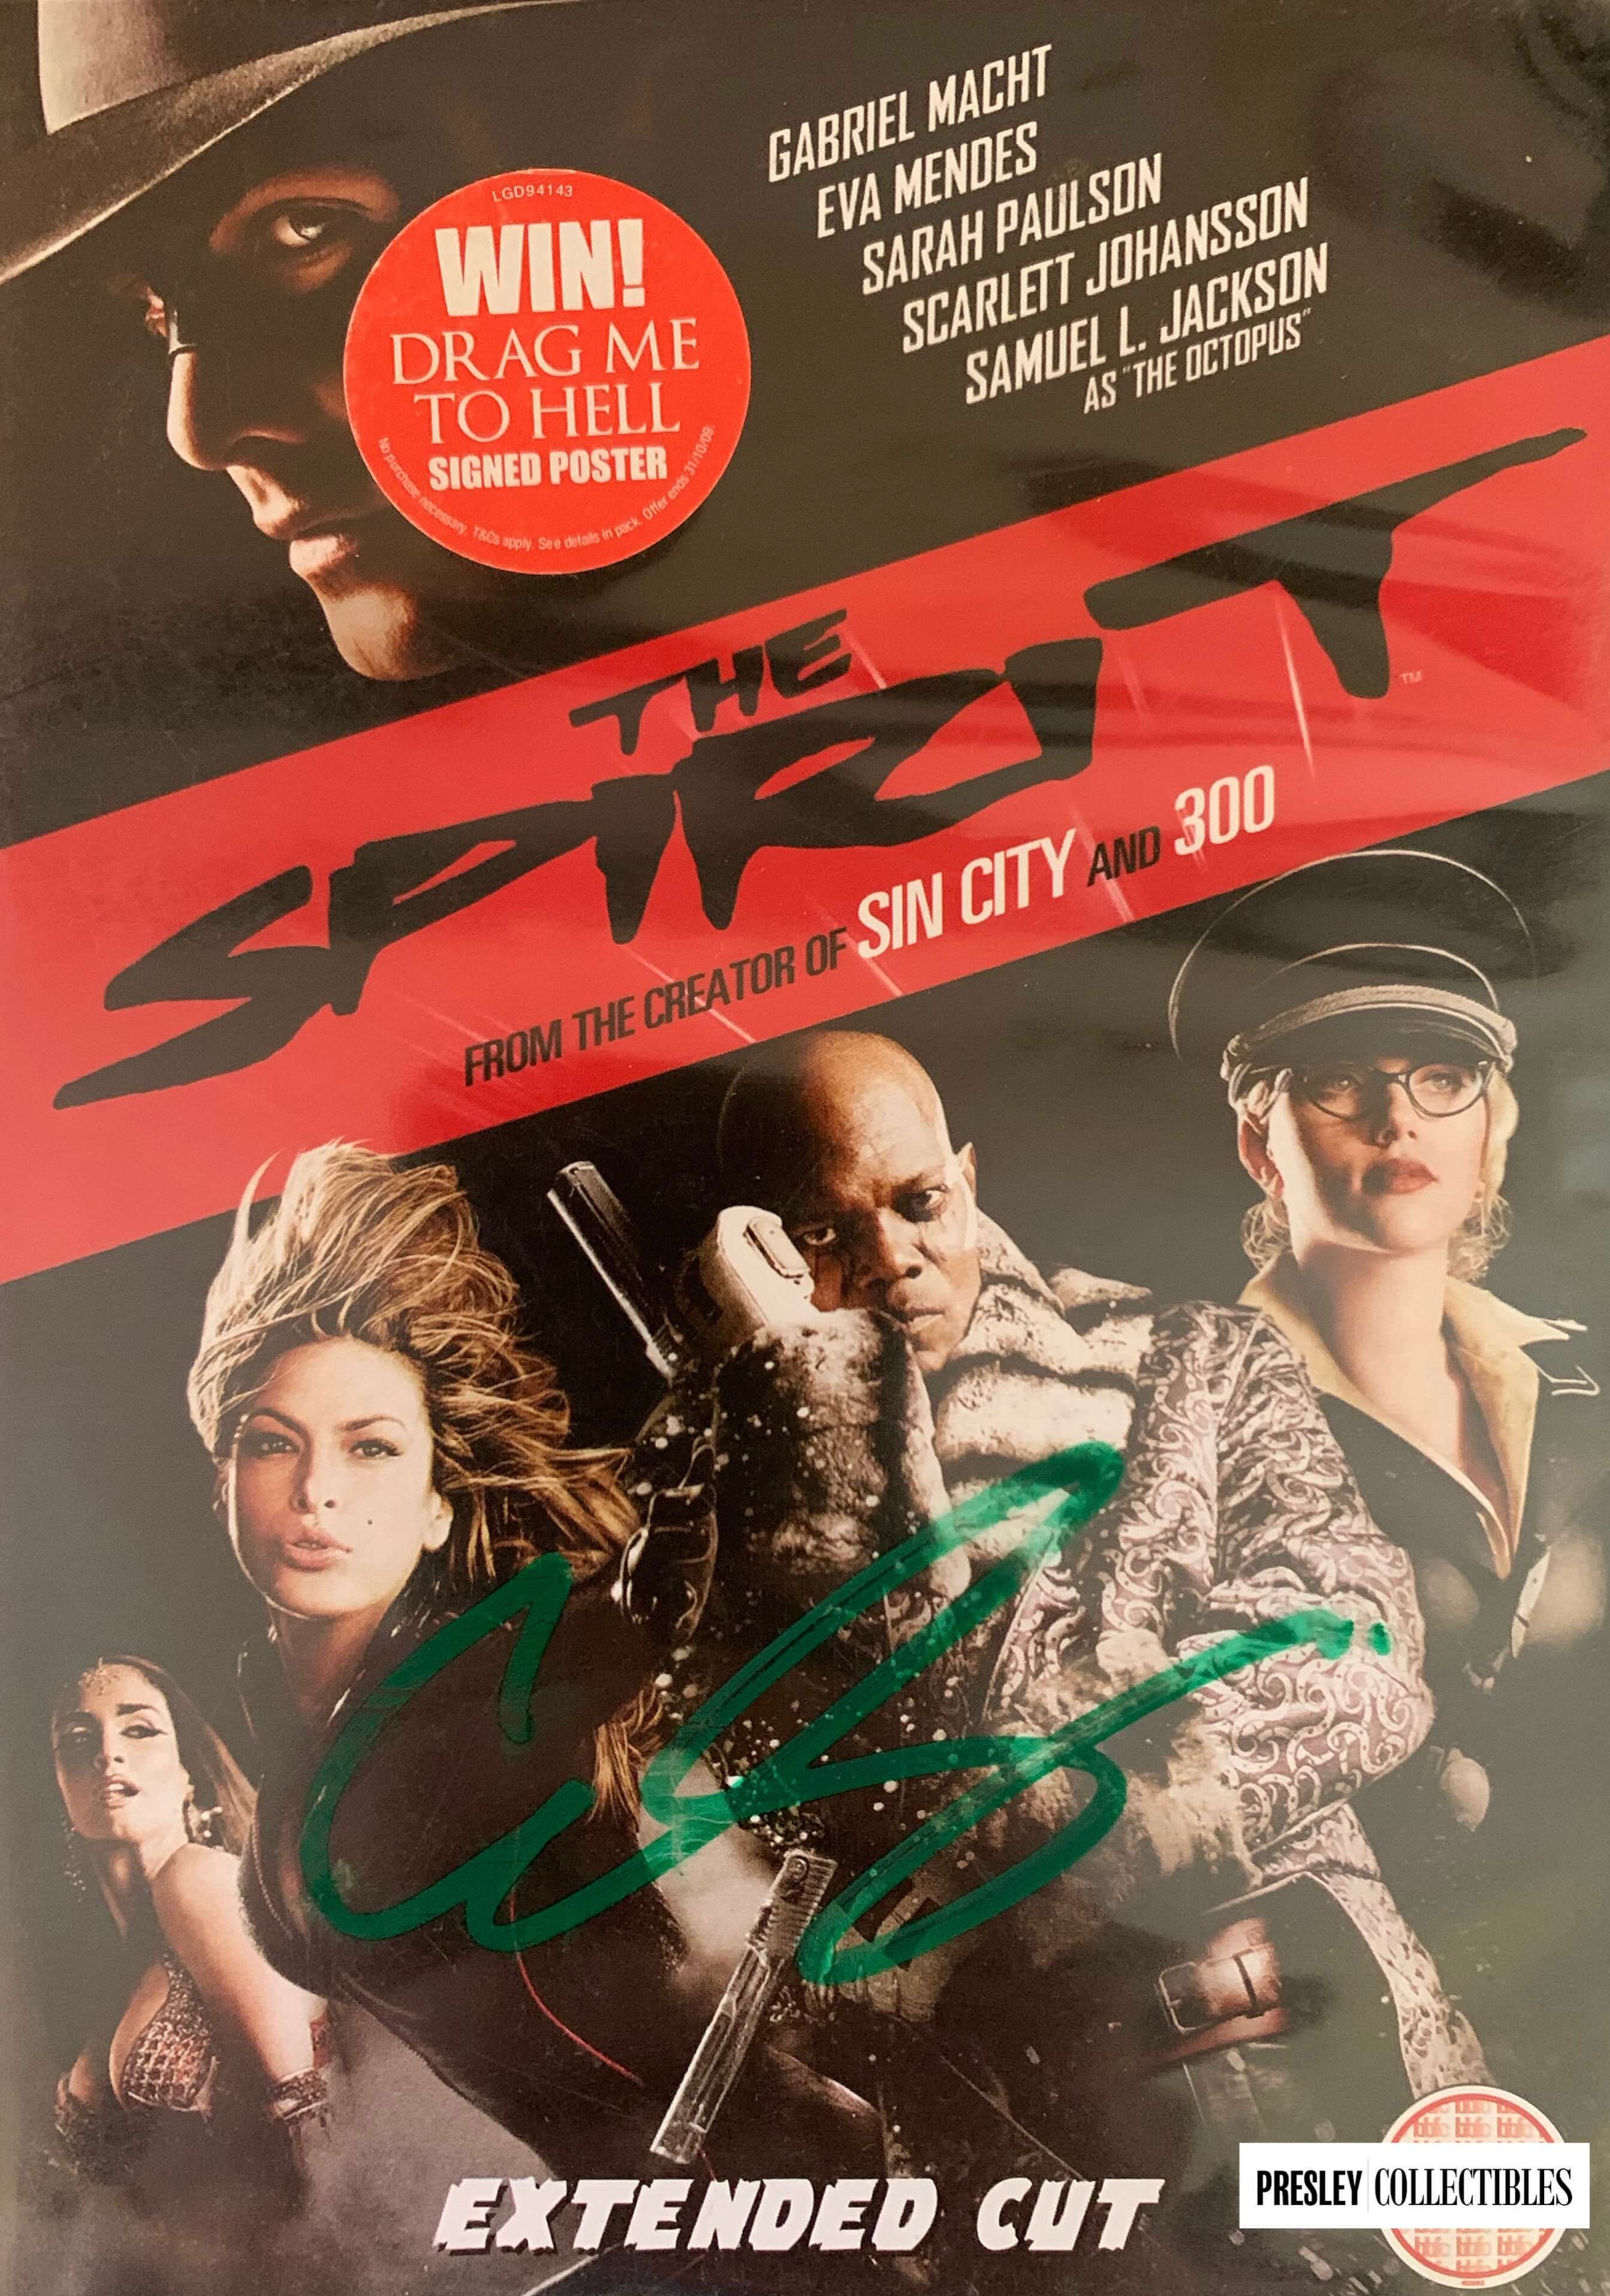 Gabriel Macht Autograph Available To Own Presley Collectibles